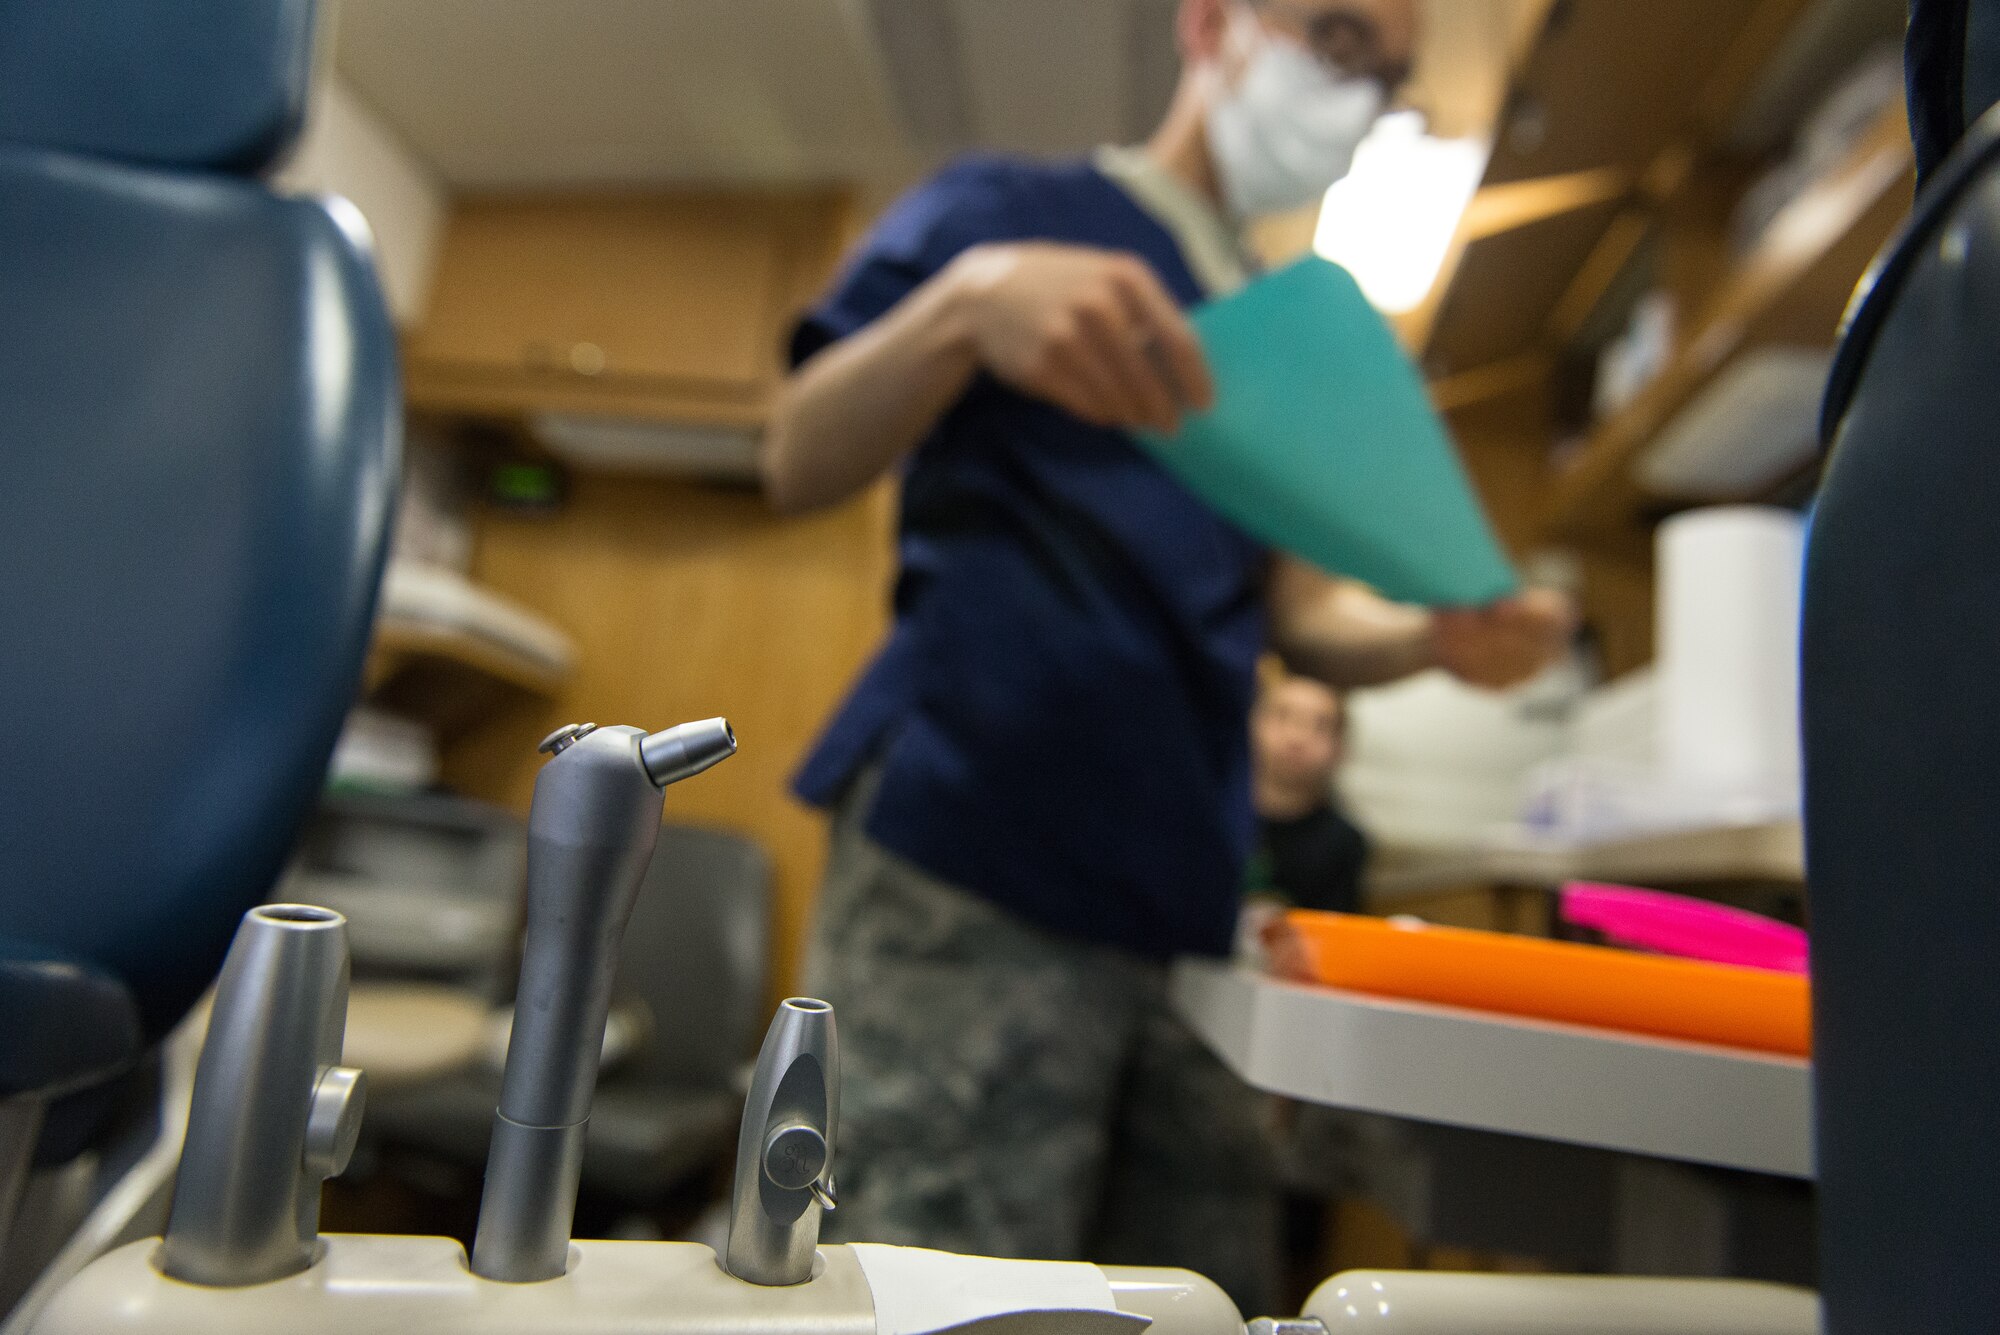 U.S. Air Force Tech Sgt. Eddie Perez, a dental technician assigned to the 176th Wing, Alaska Air National Guard, sanitizes equipment at a temporary clinic in Sikeston, Mo., June 19, 2019. U.S. service members deployed to Sikeston as part of a joint service medical exercise that provides training to service members and no-cost medical services to the community. (U.S. Air National Guard photo by Senior Airman Jonathan W. Padish)